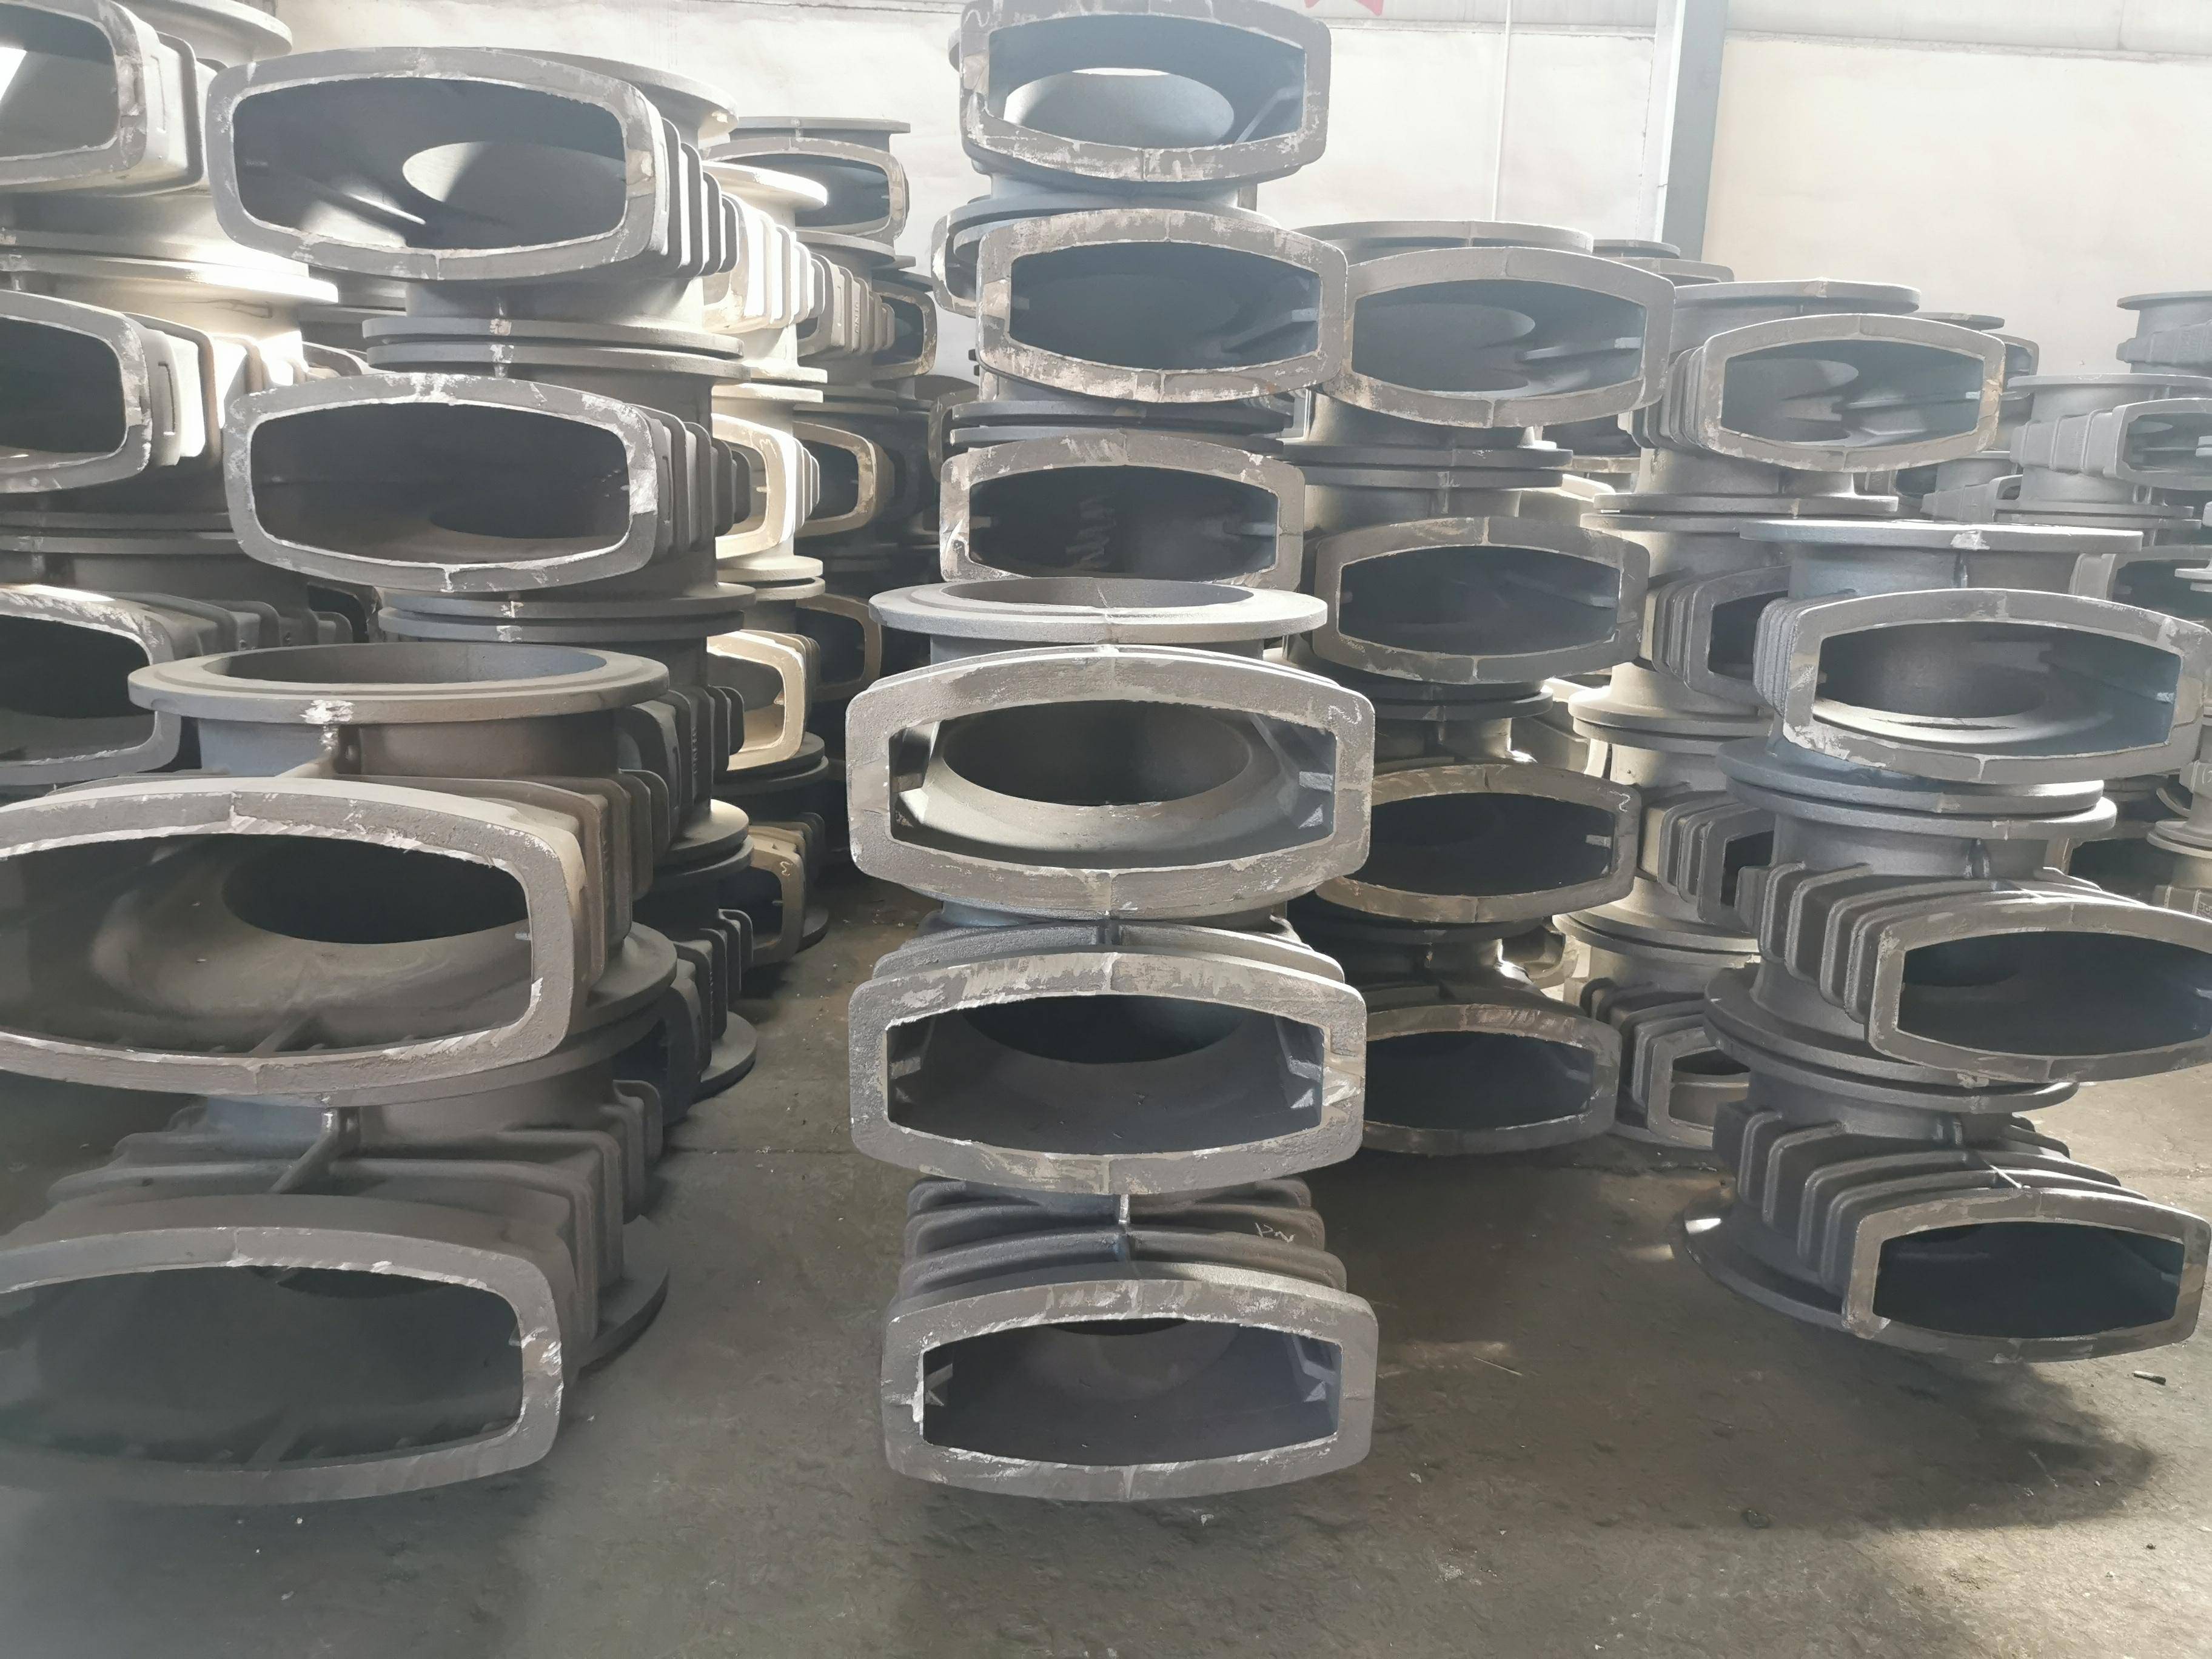 Gate valve bodies and bonnets, elbows with lot production Featured Image